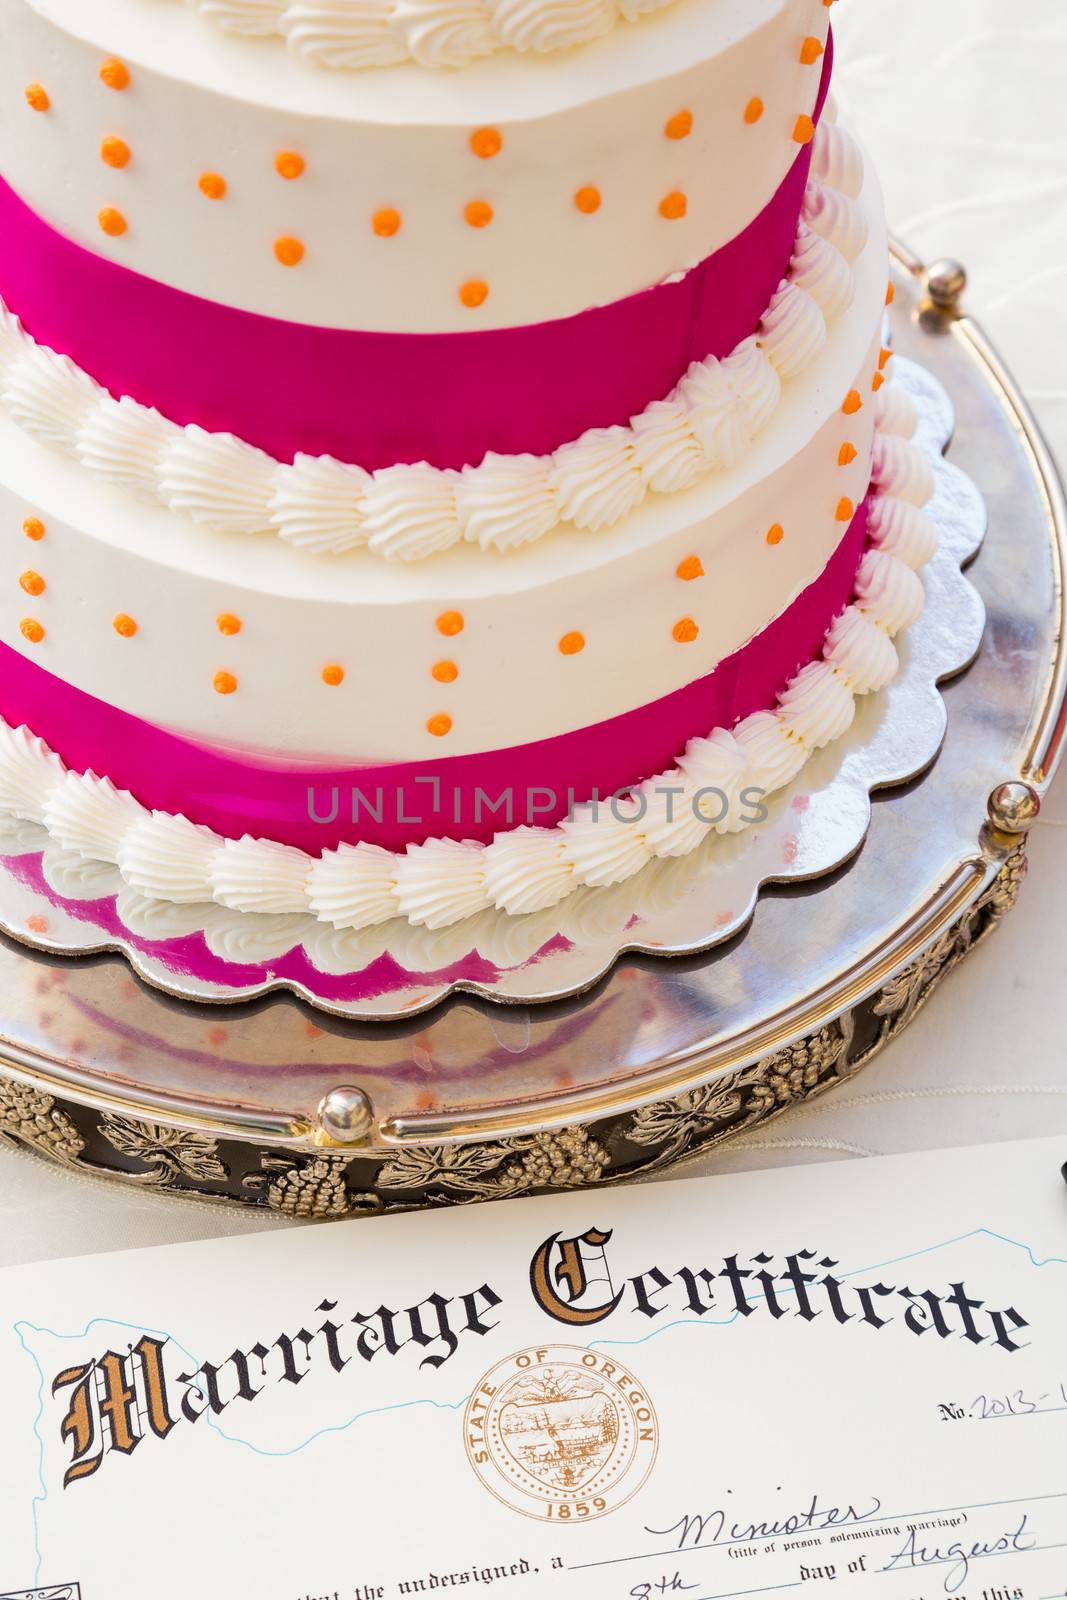 A wedding cake sits next to the bride and groom marriage certificate at this ceremony and reception.